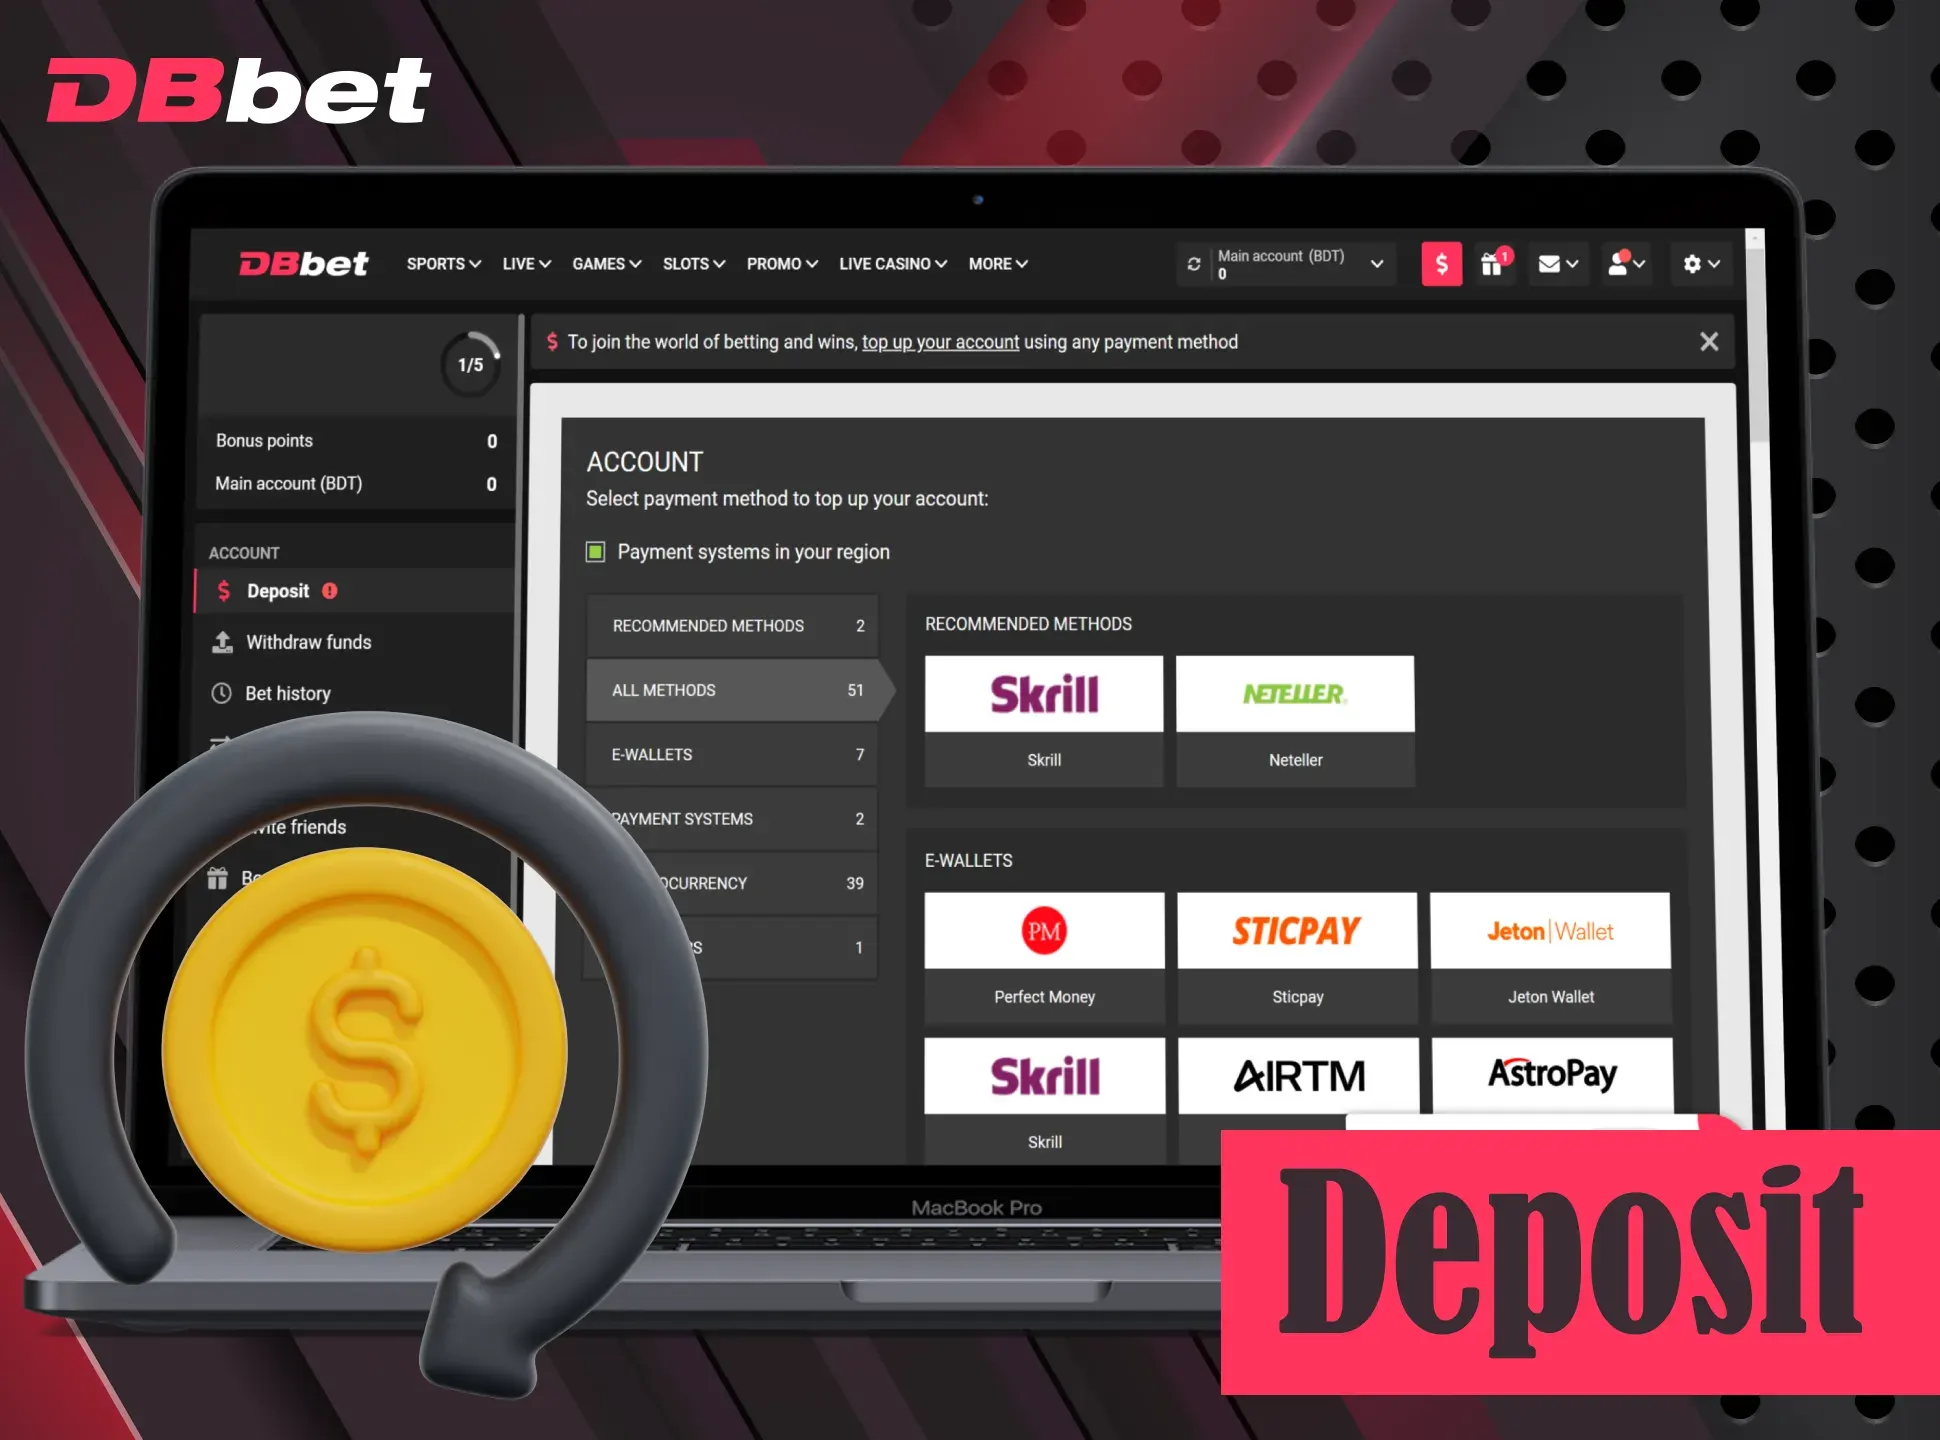 Make your first deposit at DBbet and get additional bonus.